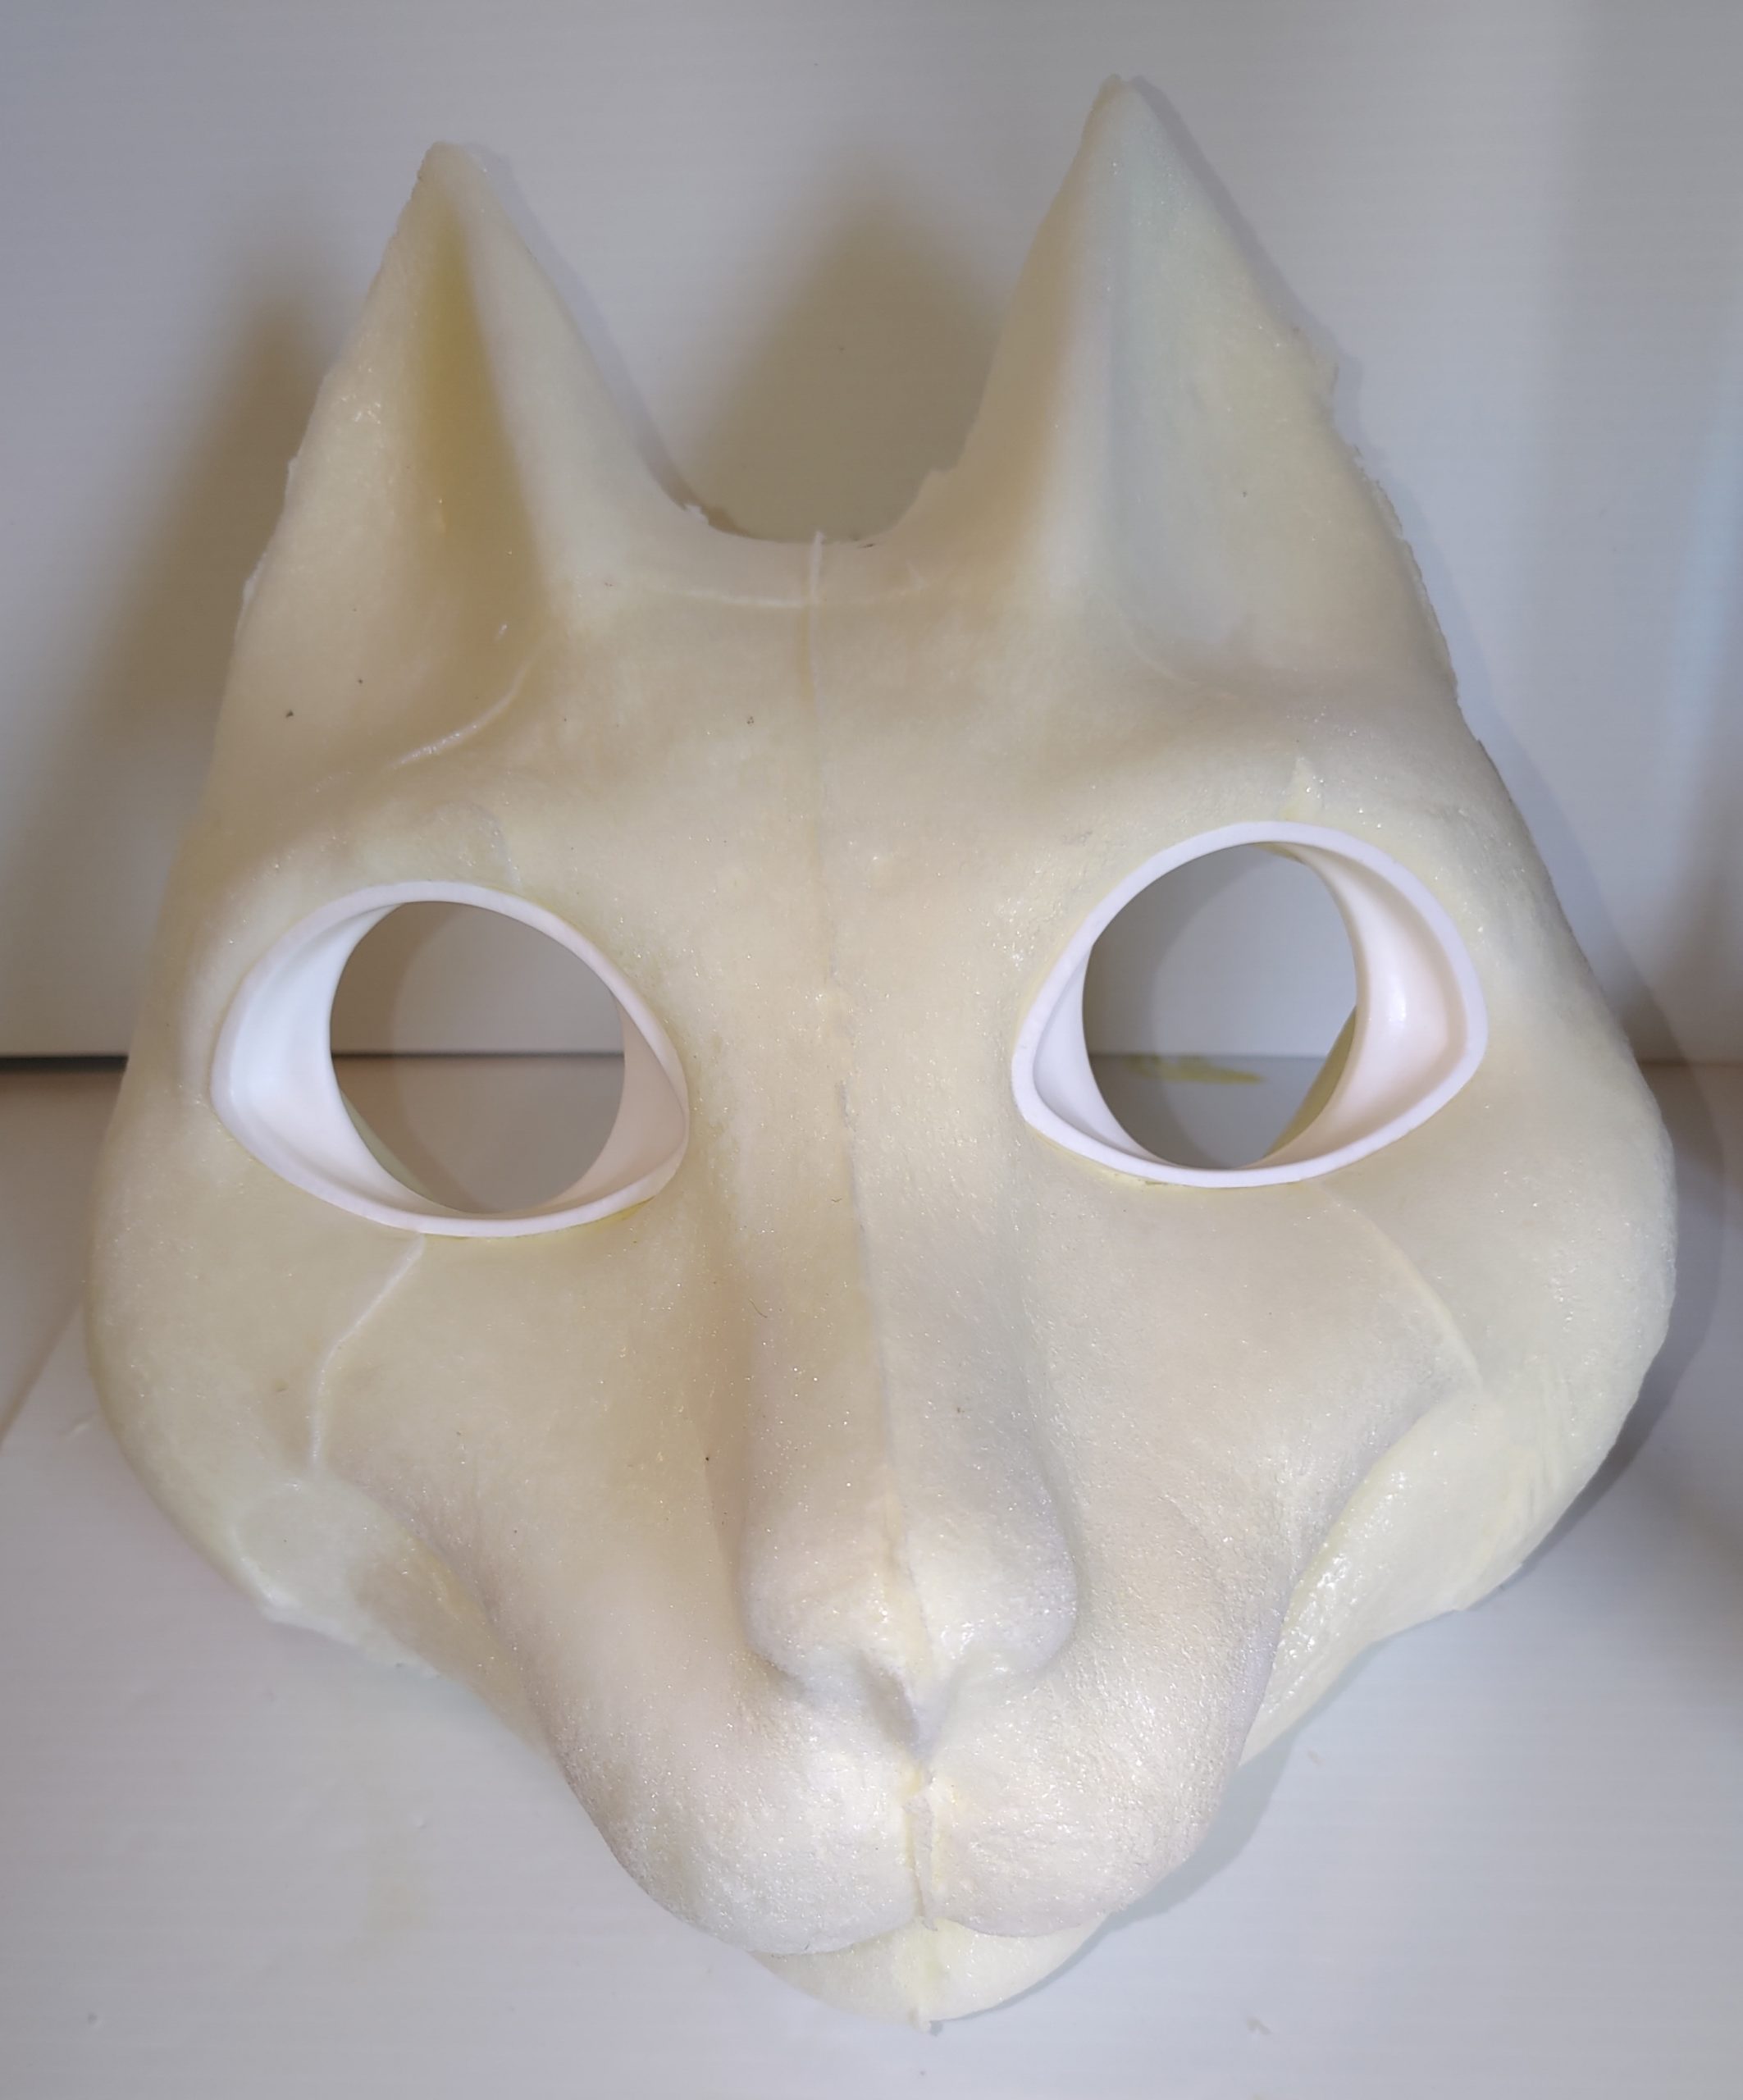 Max the Guinea Pig, Furry Fursuit Foam Full Head Base for Fursuiting, For  Furries and Cosplay - DIY - fhb15 